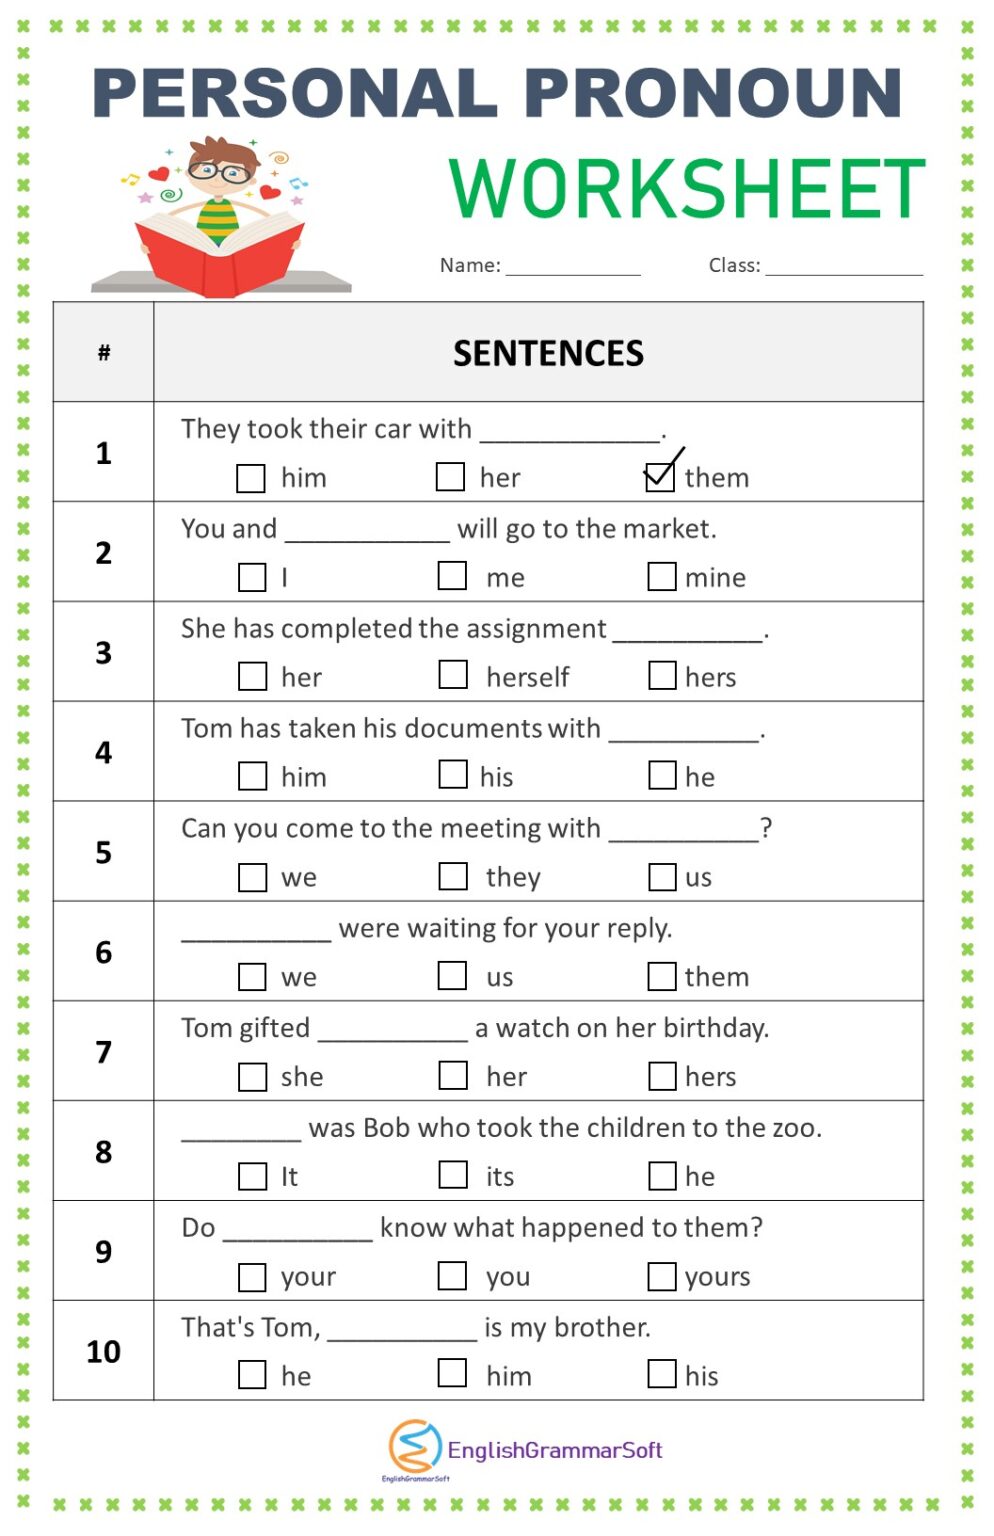 object-pronouns-worksheet-for-grade-4-your-home-teacher-english-pronouns-english-grammar-for